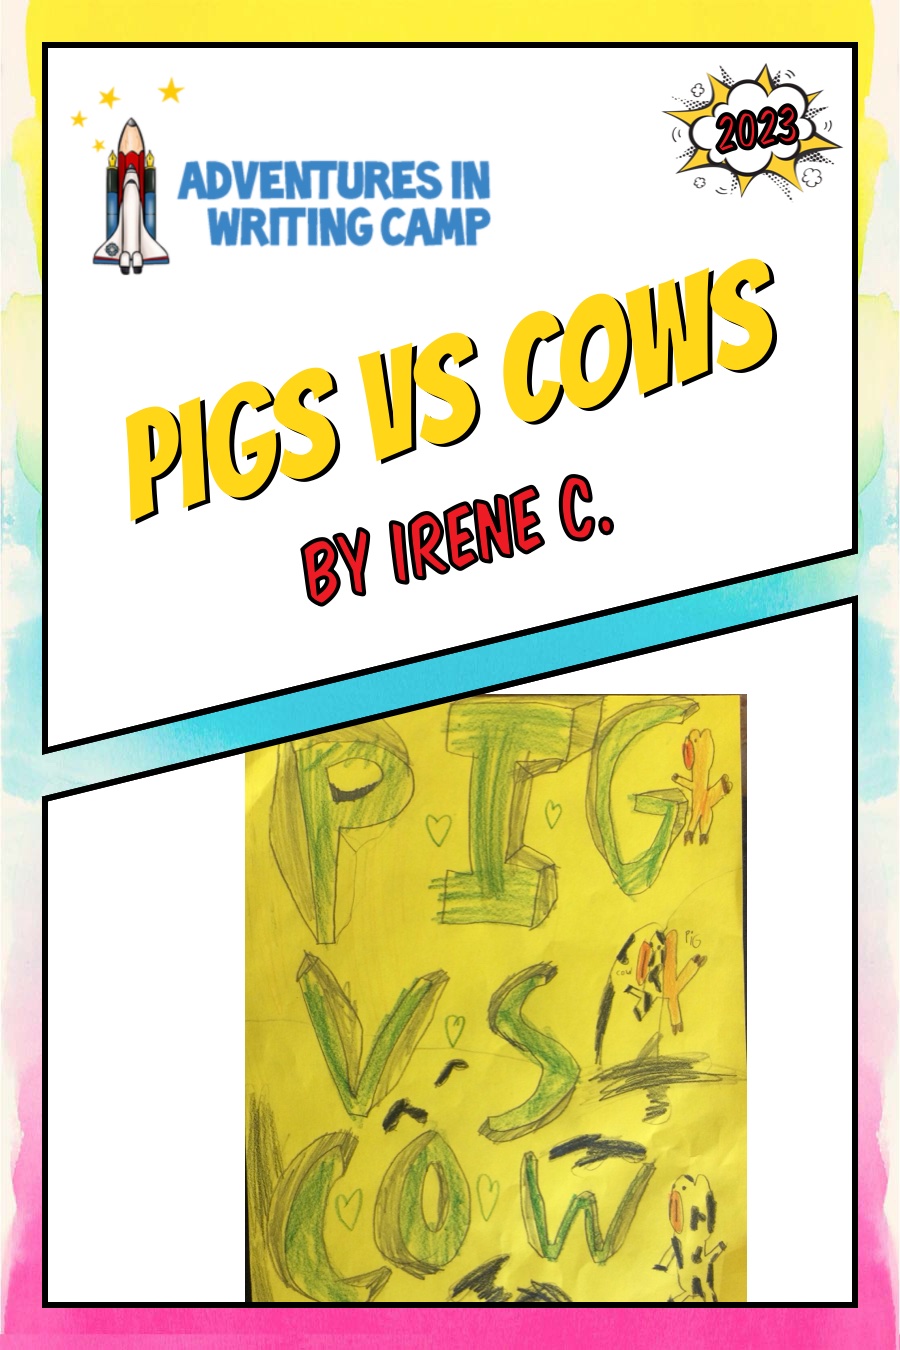 Pigs vs Cows by Irene C